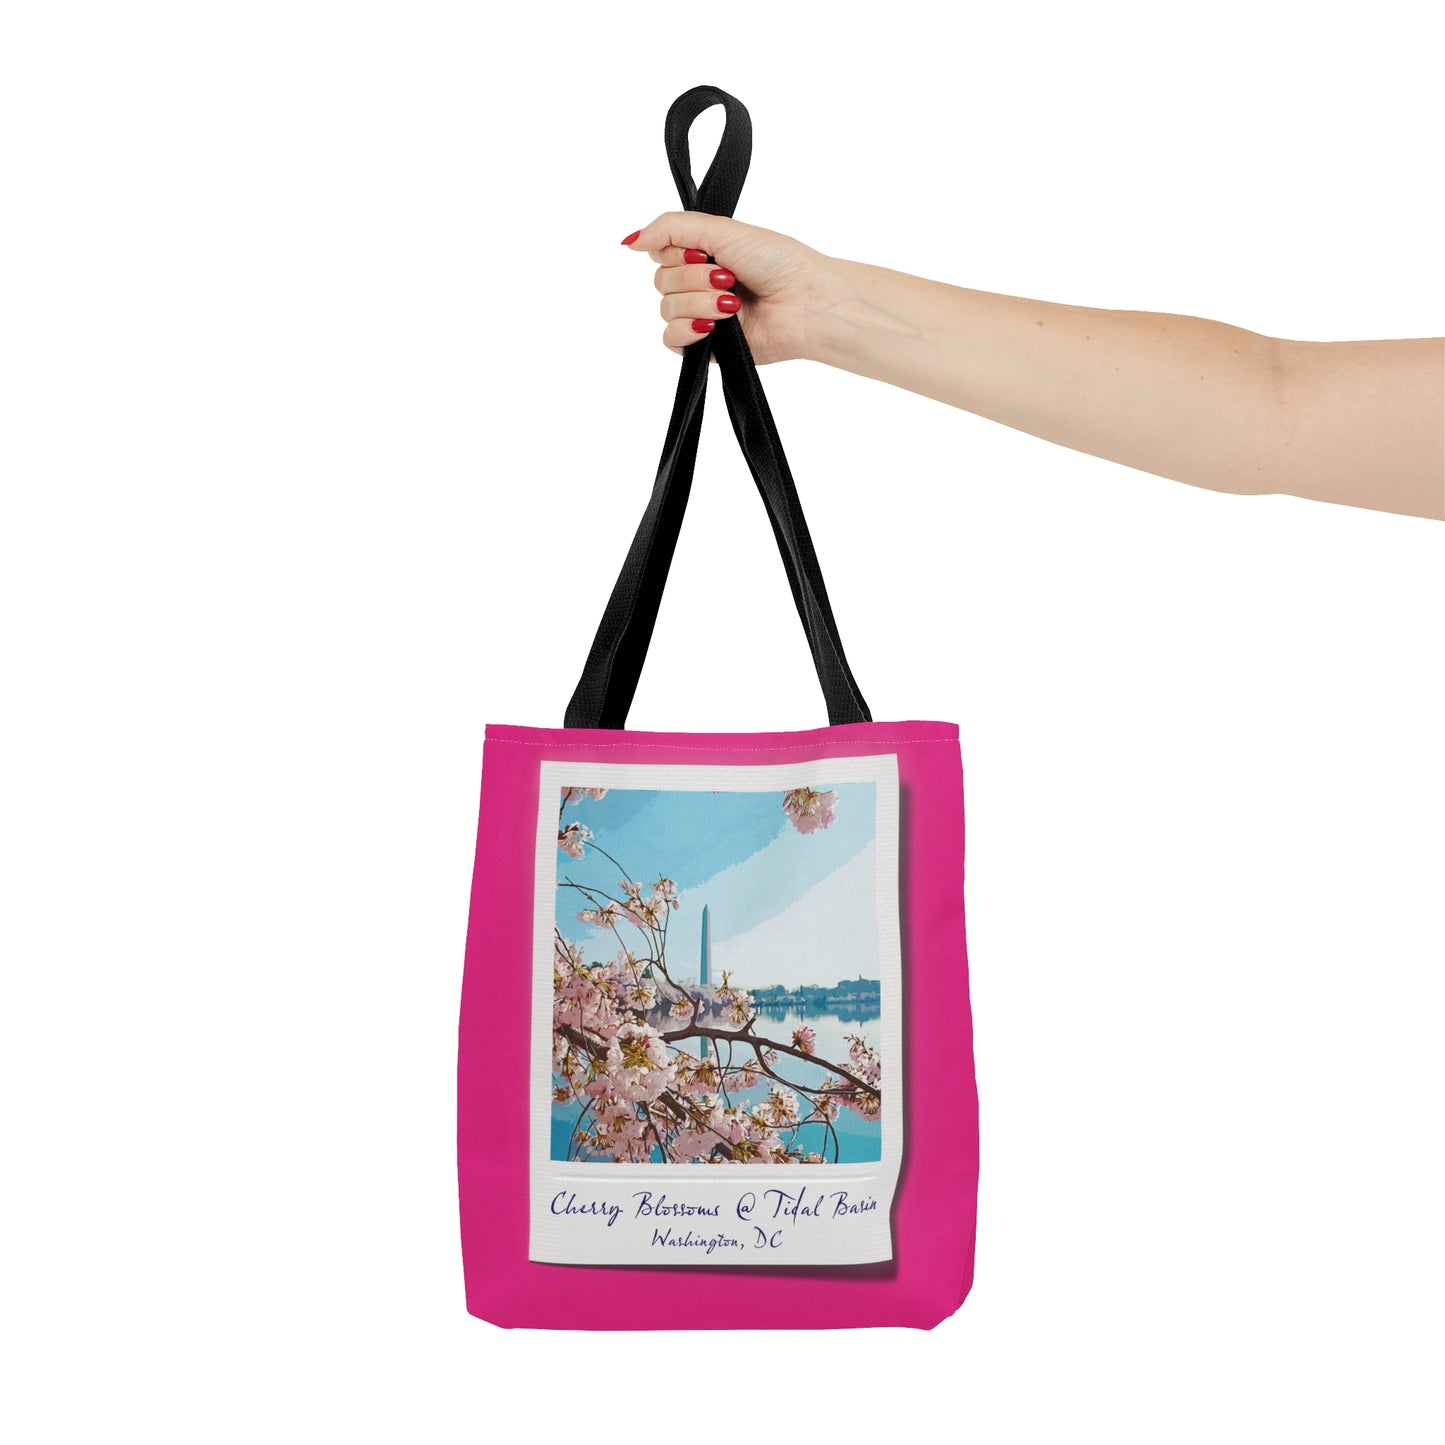 Instant Photo - Tidal Basin Cherry Trees - Mean Girls Lipstick ff00a8 - Tote Bag